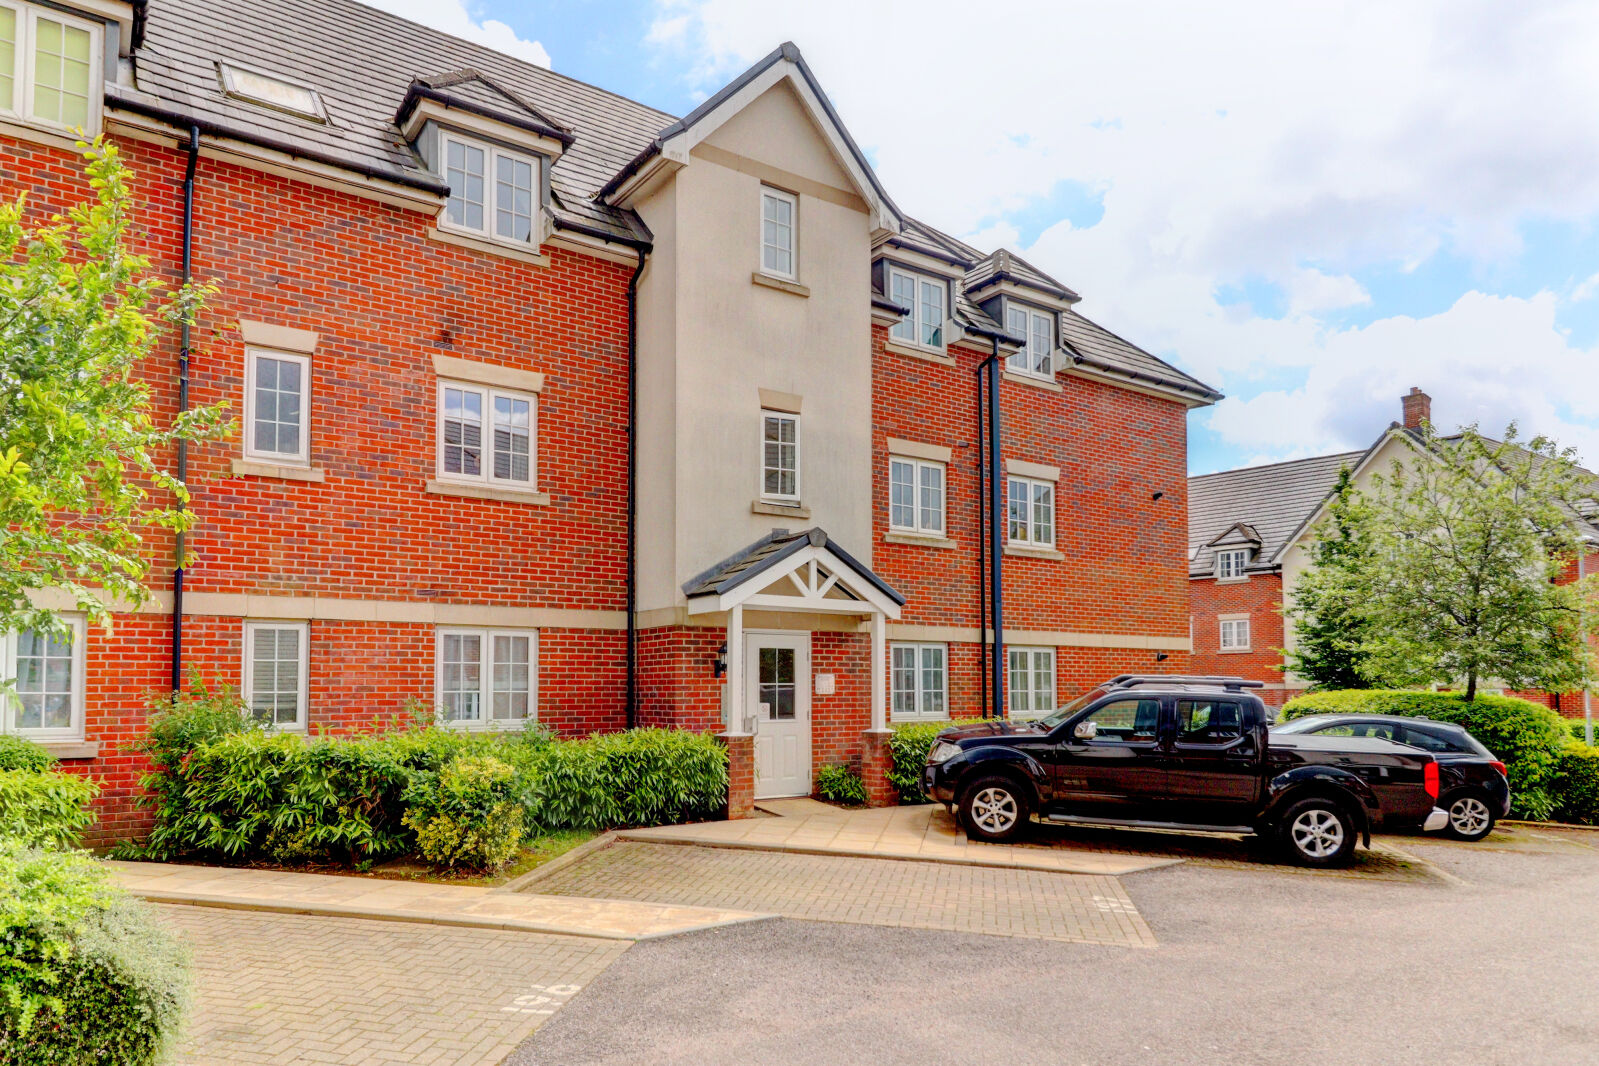 2 bedroom  flat for sale Grange Drive, High Wycombe, HP13, main image